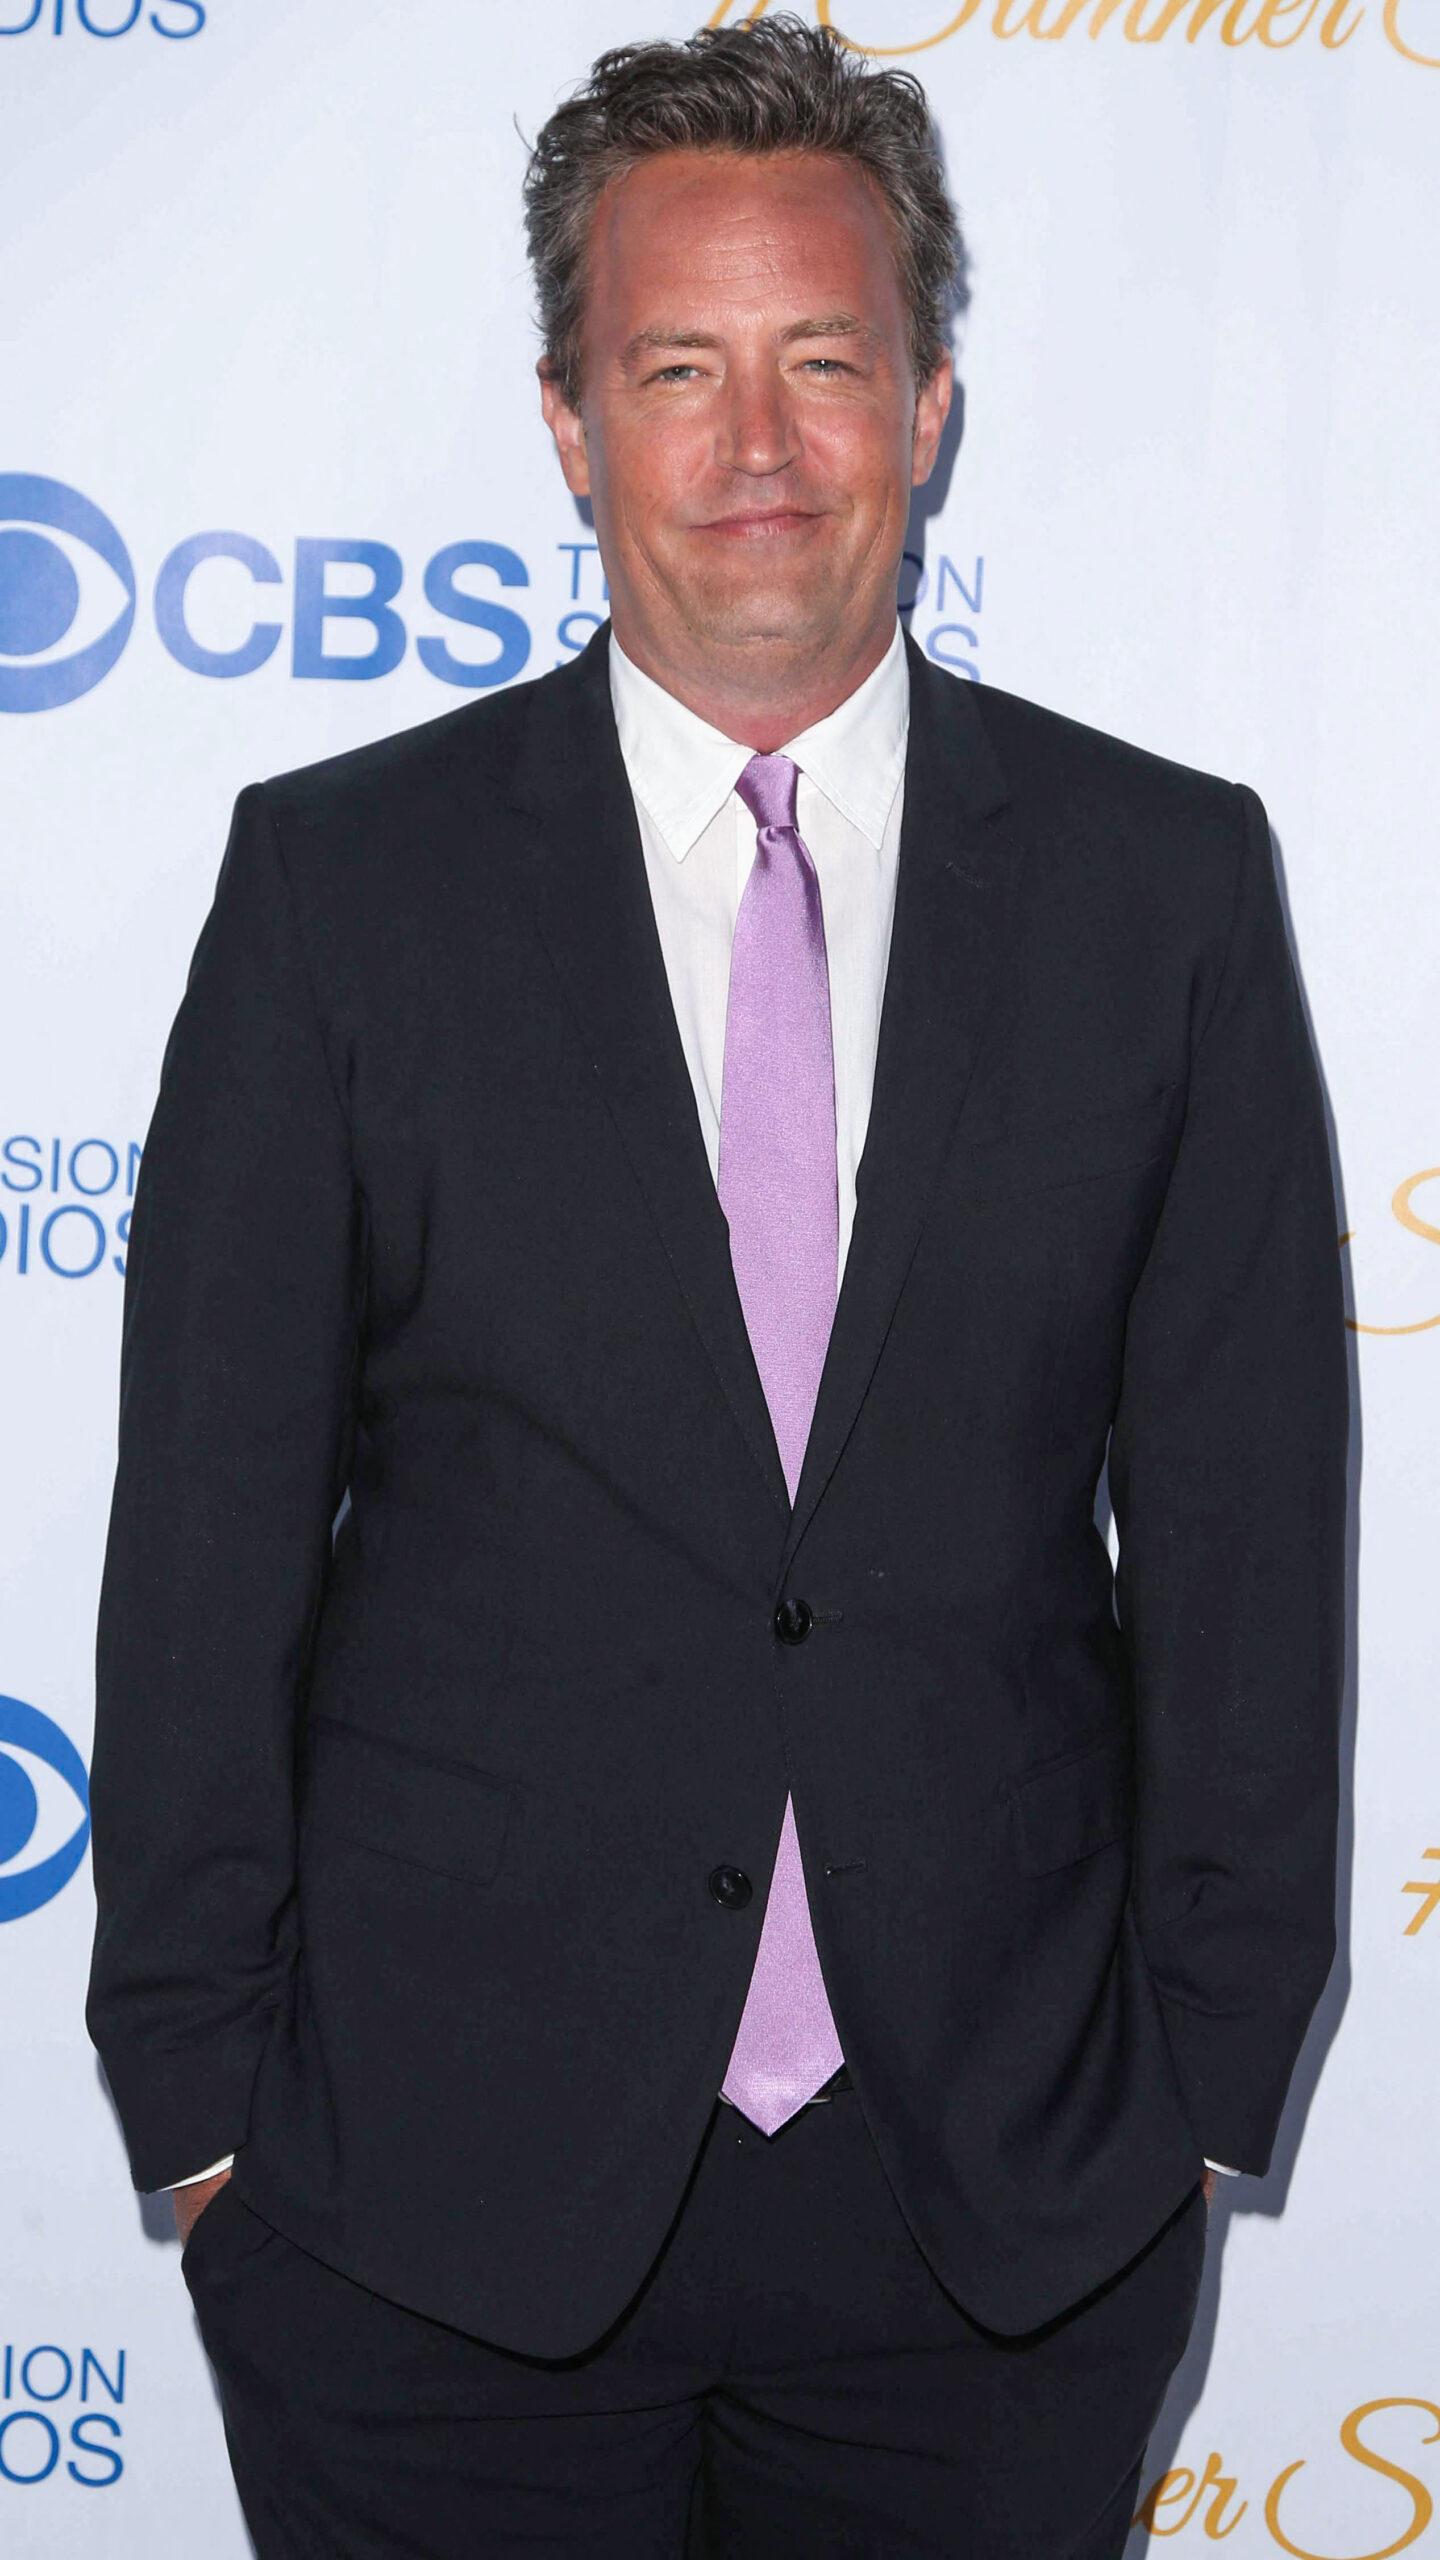 Matthew Perry's Cause Of Death Revealed: Acute Effects Of Ketamine